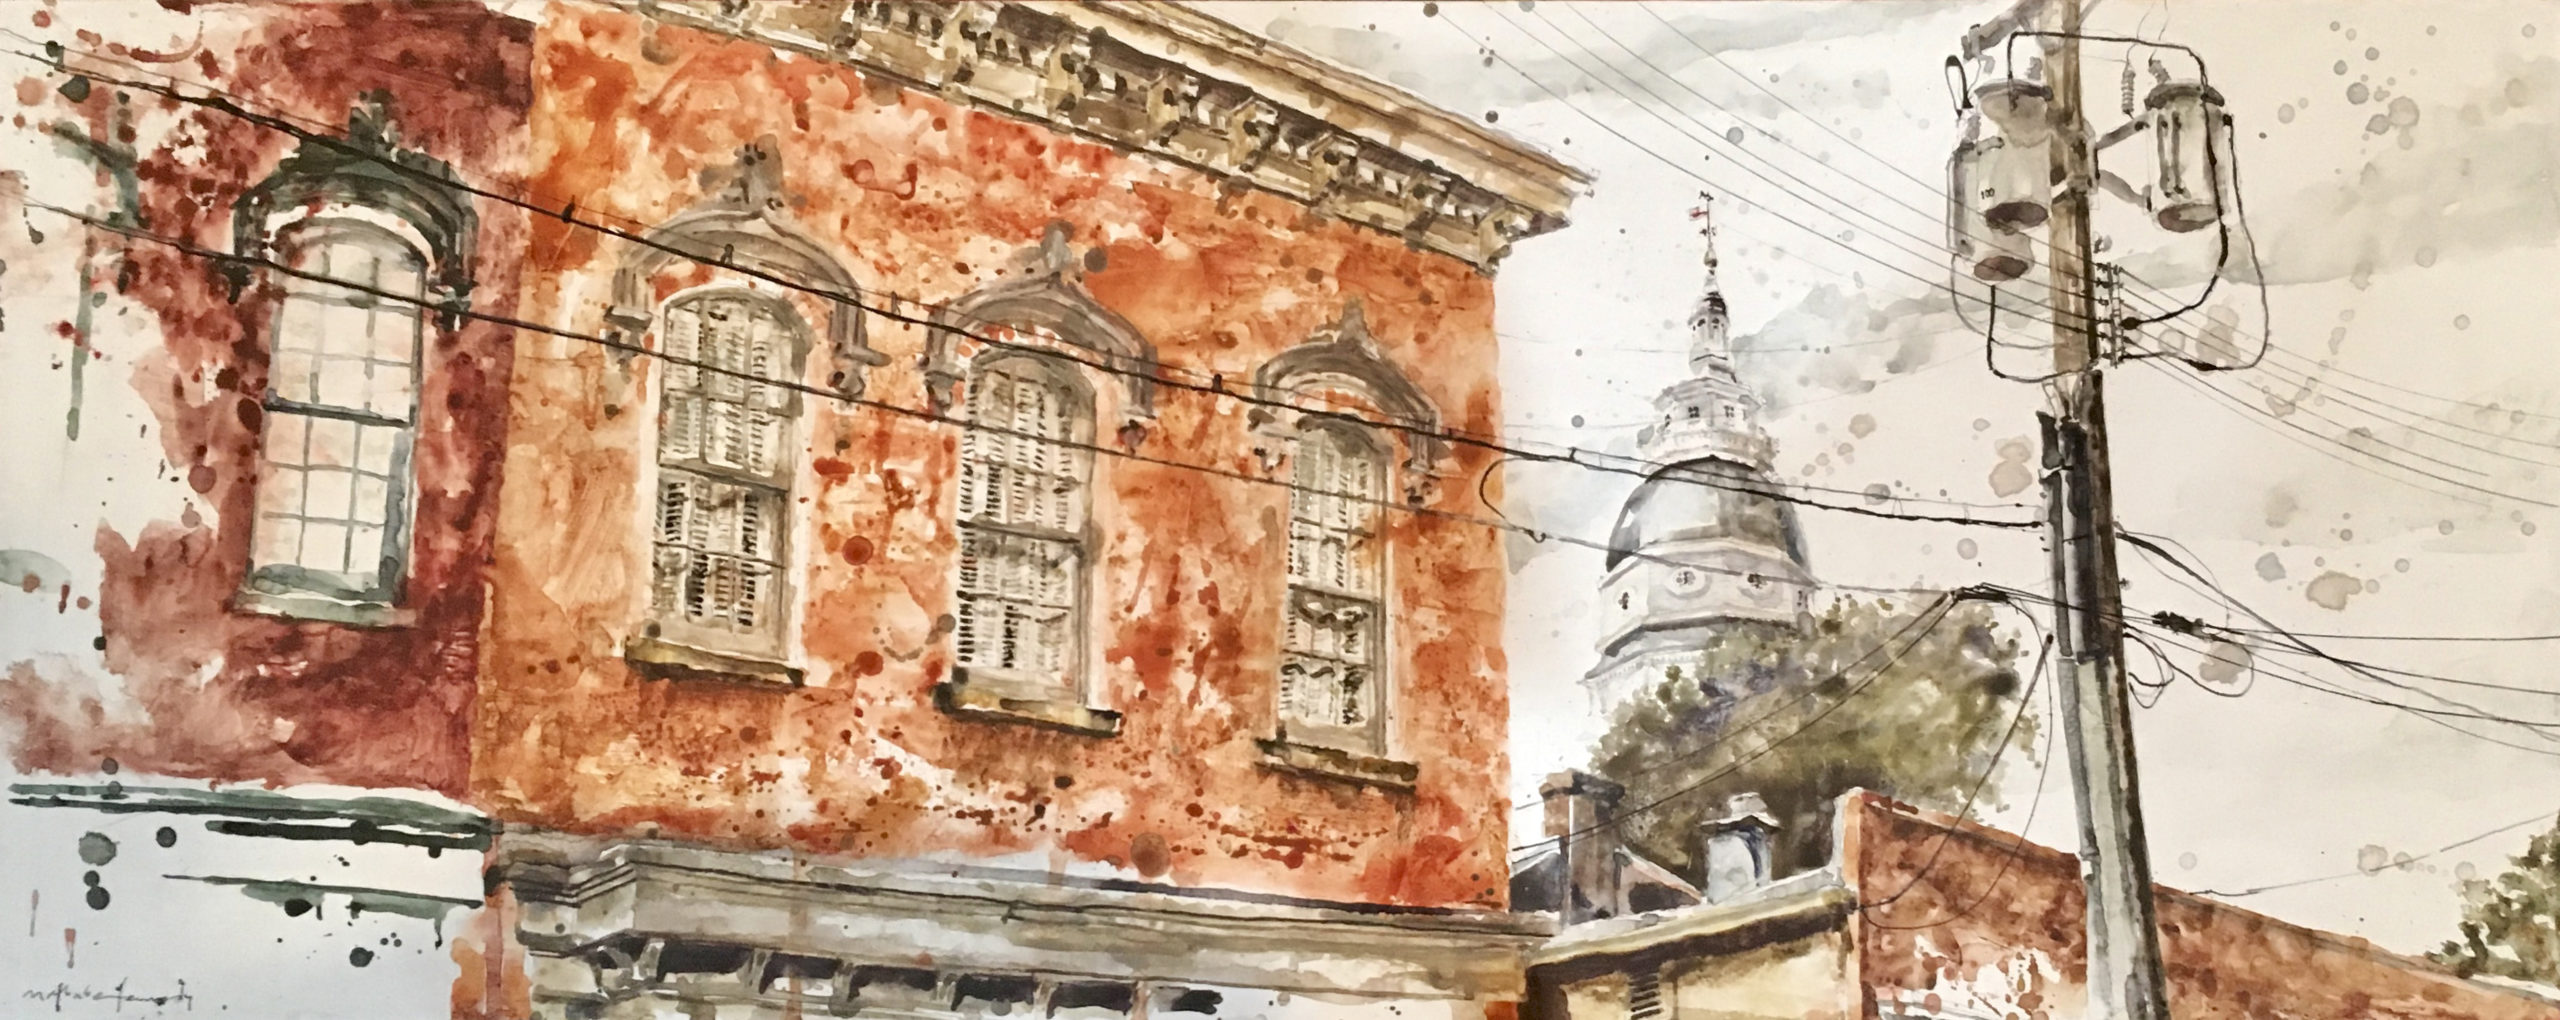 plein air watercolor painting - Mat Barber Kennedy, "State House on Conduit," 2018, watercolor, 12 x 30 in., Private collection, Plein air